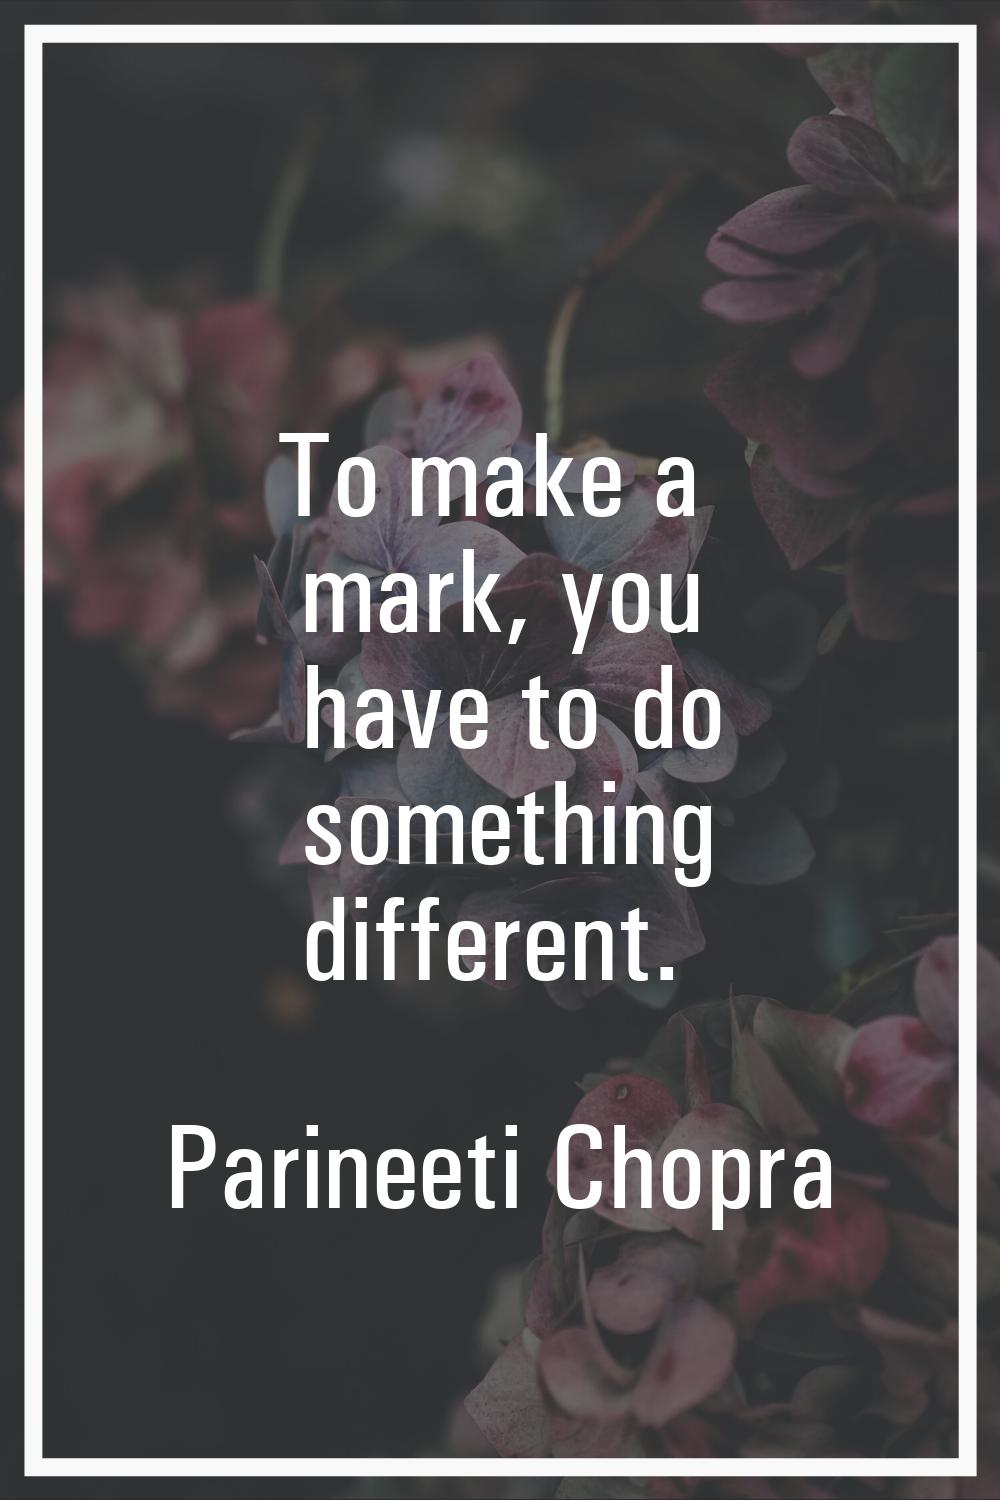 To make a mark, you have to do something different.